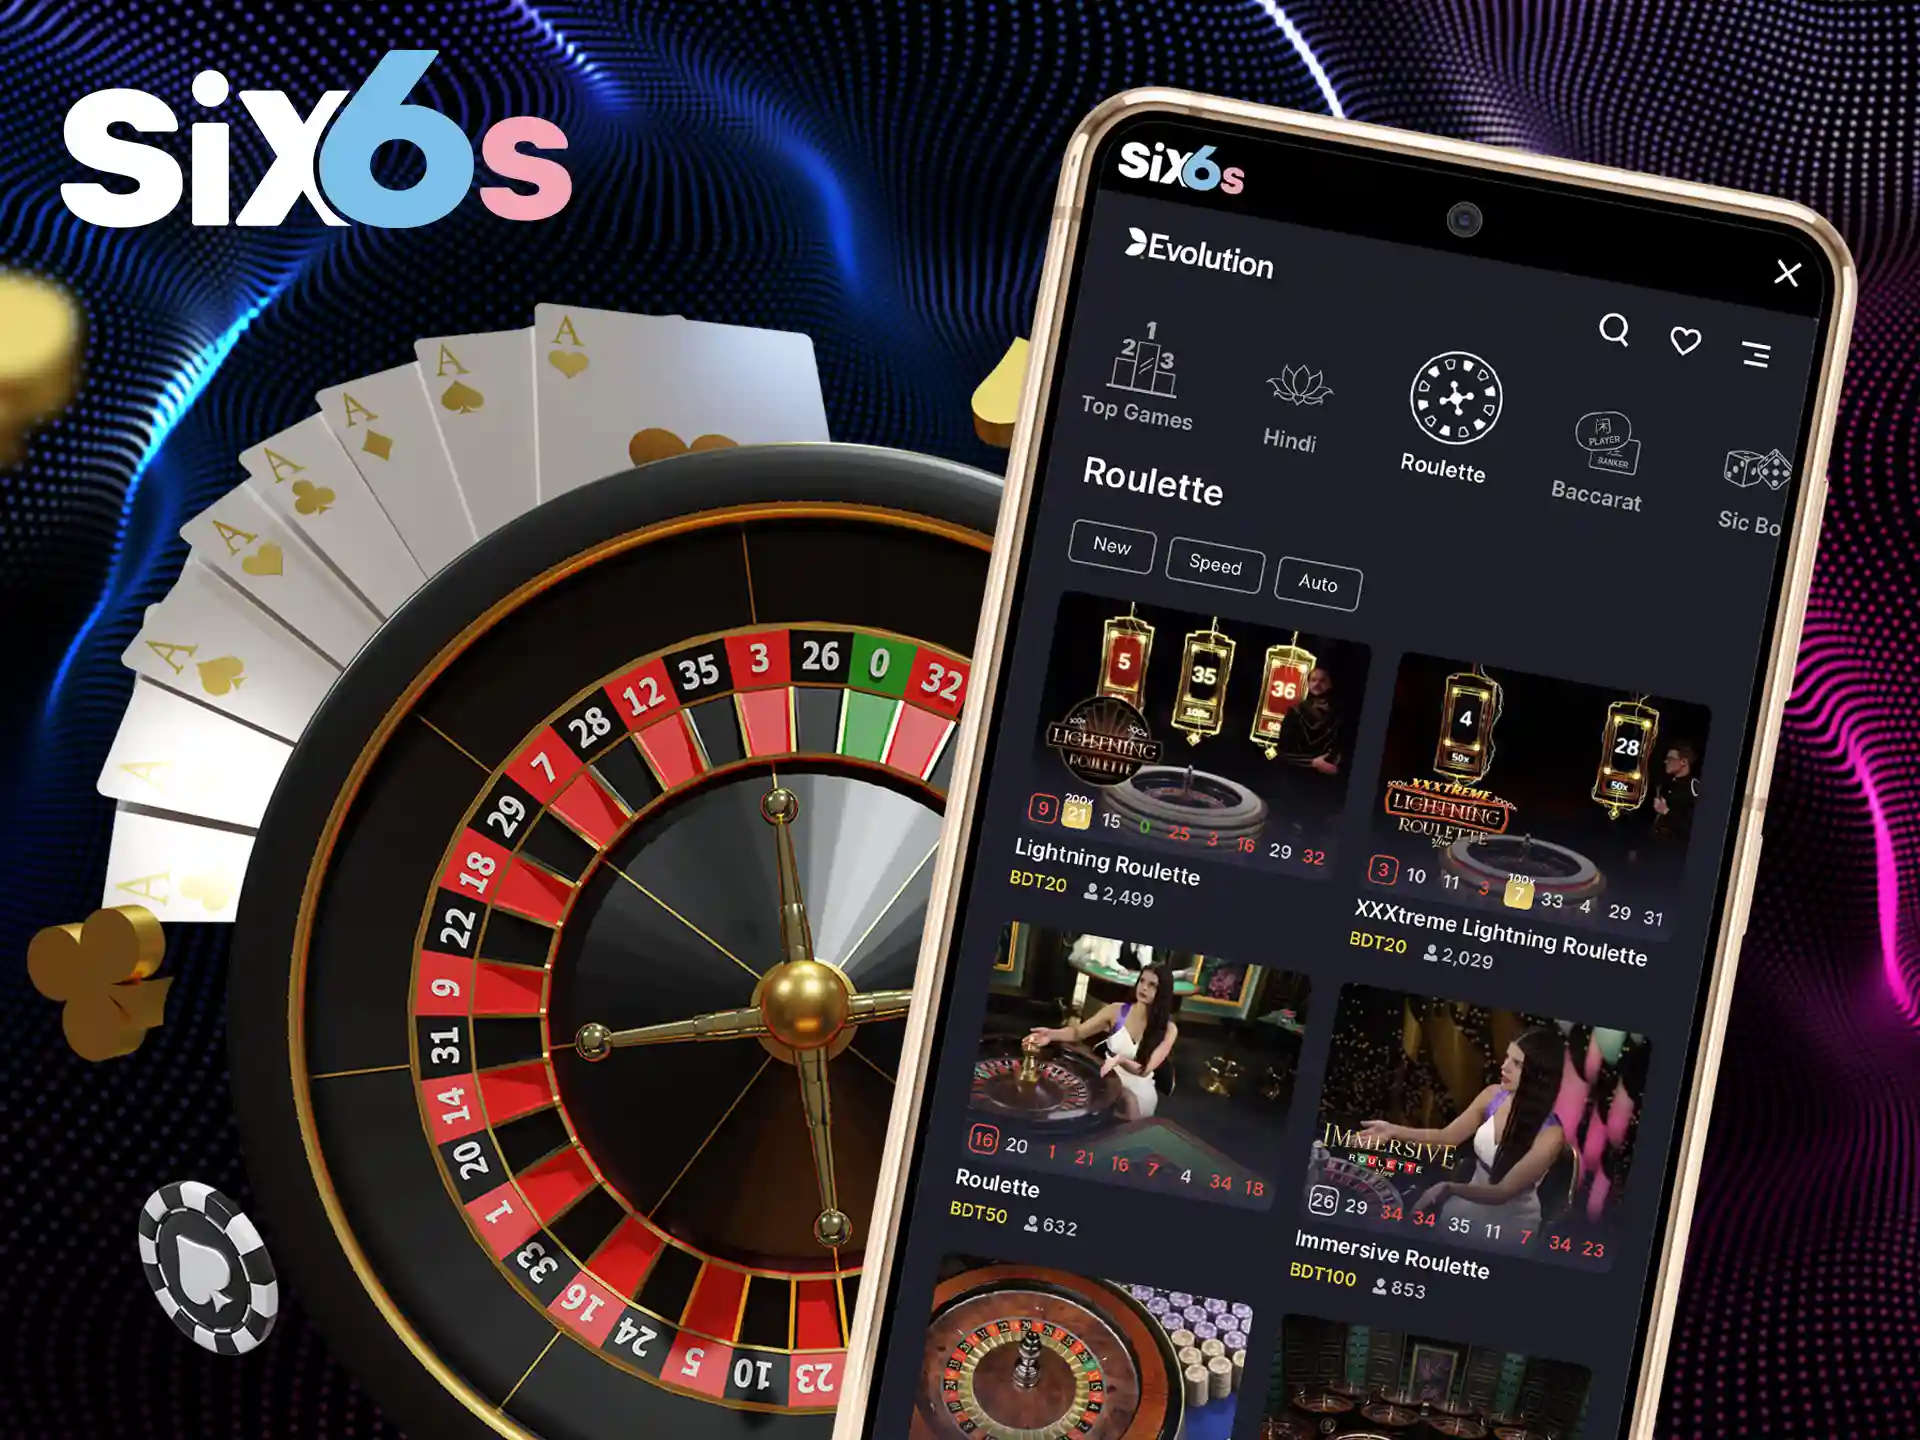 Play different types of roulette at Six6s just like in real life.